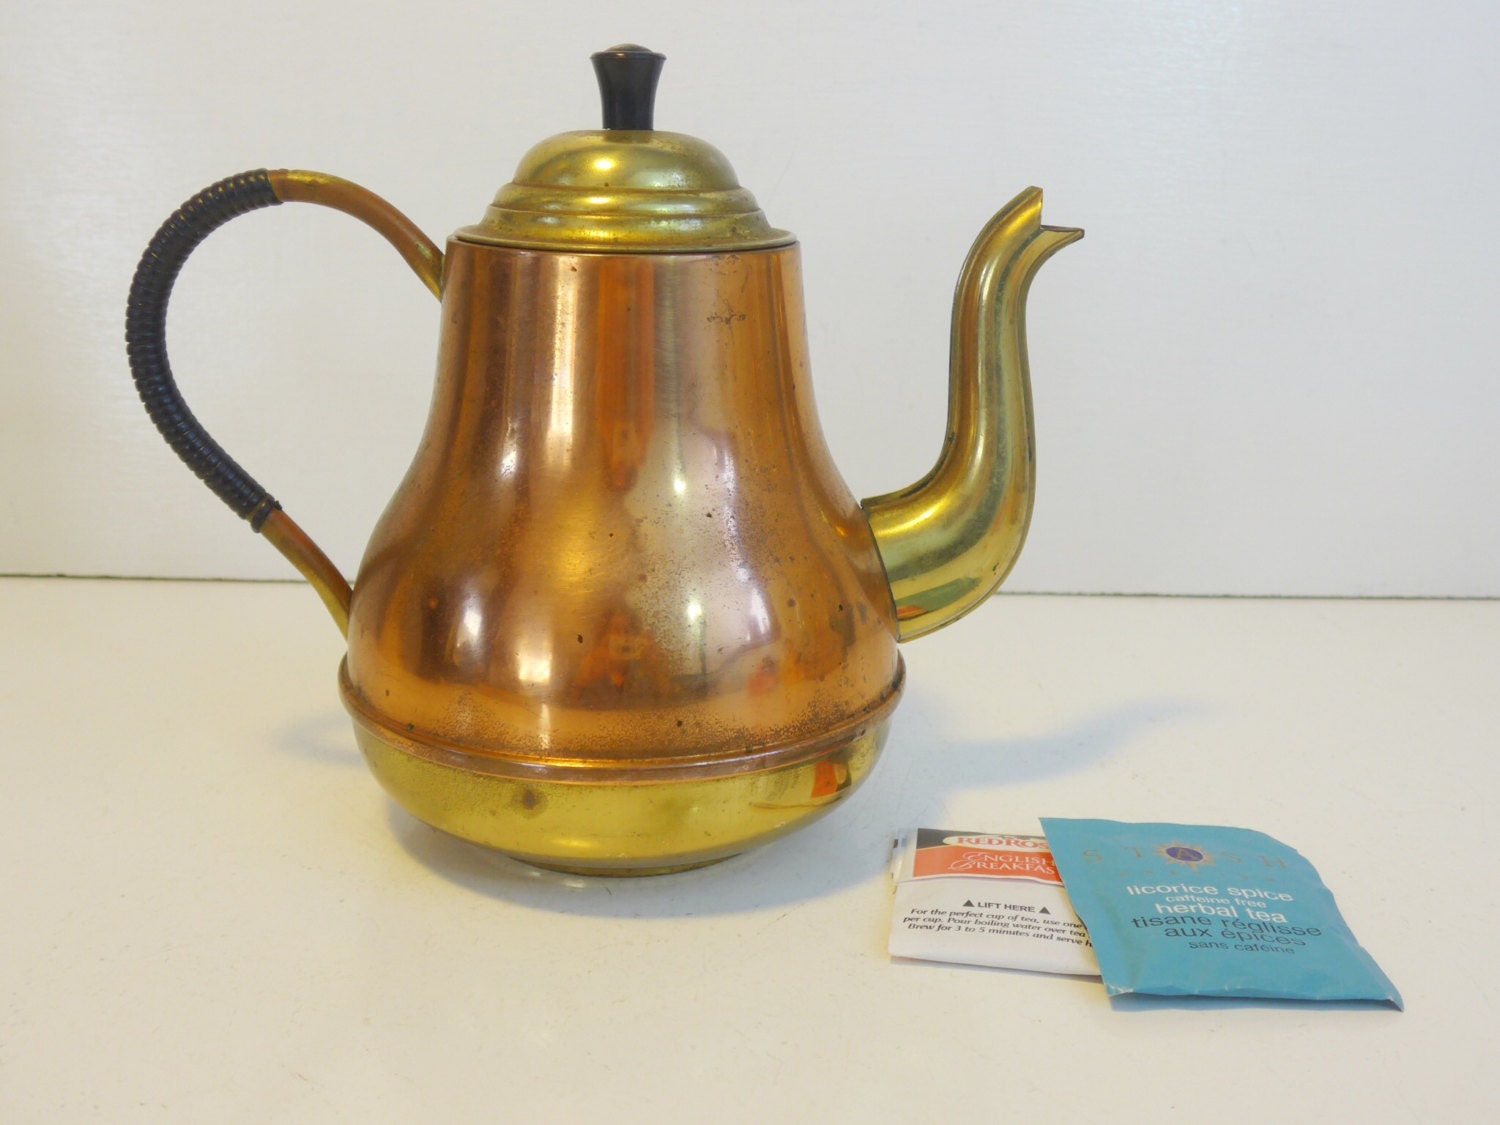 Copper & Brass Antique Coffee Pot or Urn, Gallery Cup Warmer